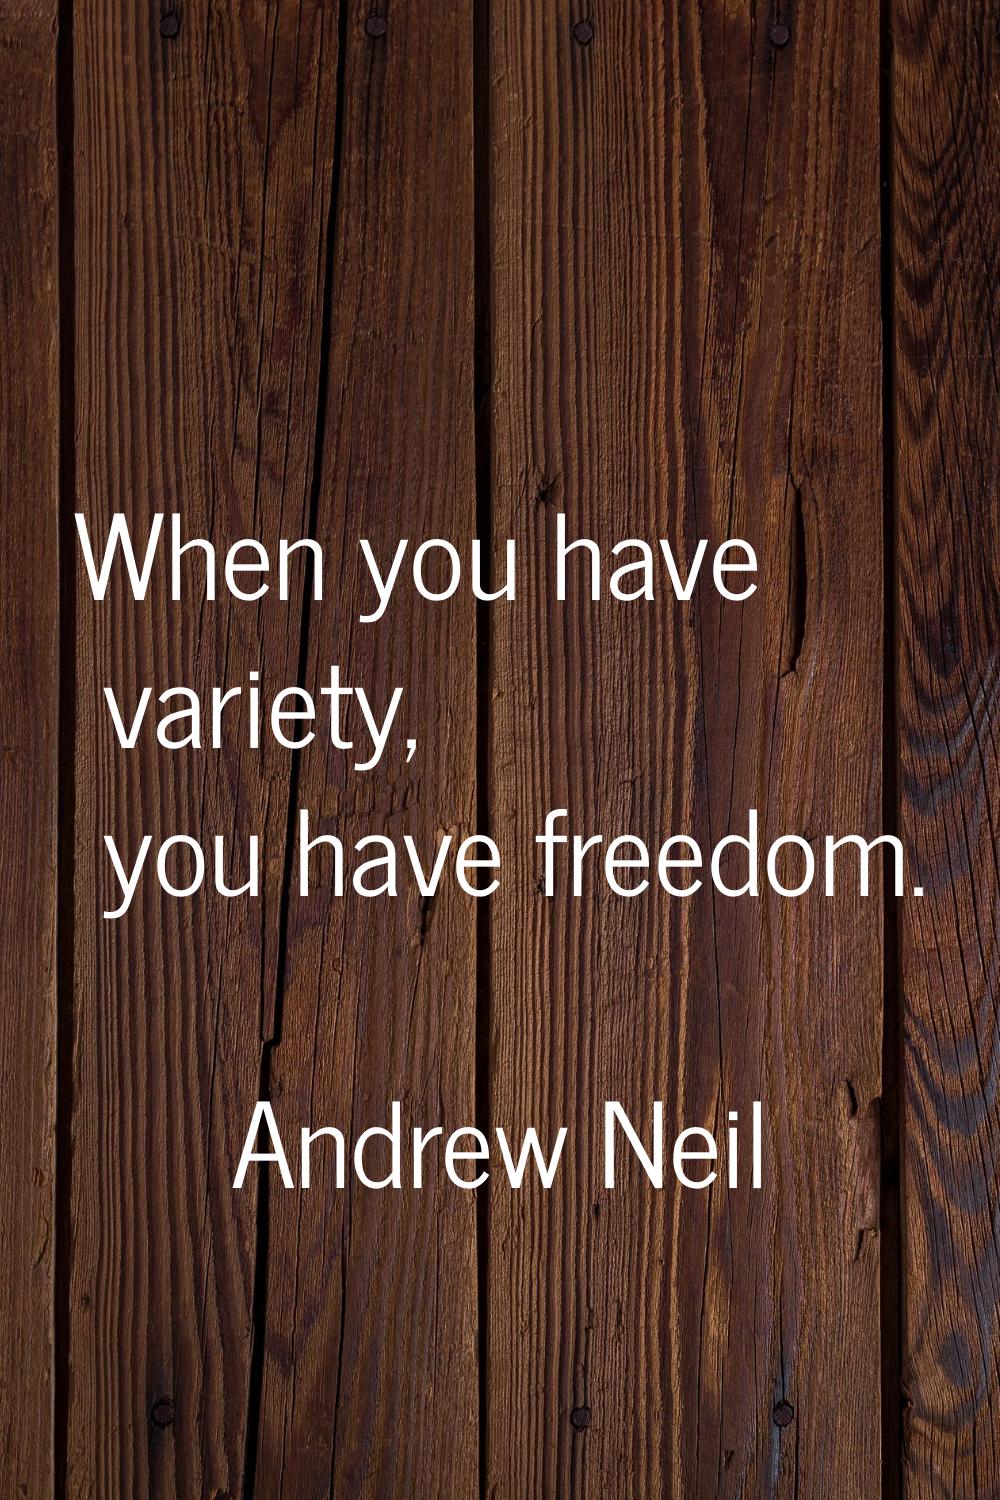 When you have variety, you have freedom.